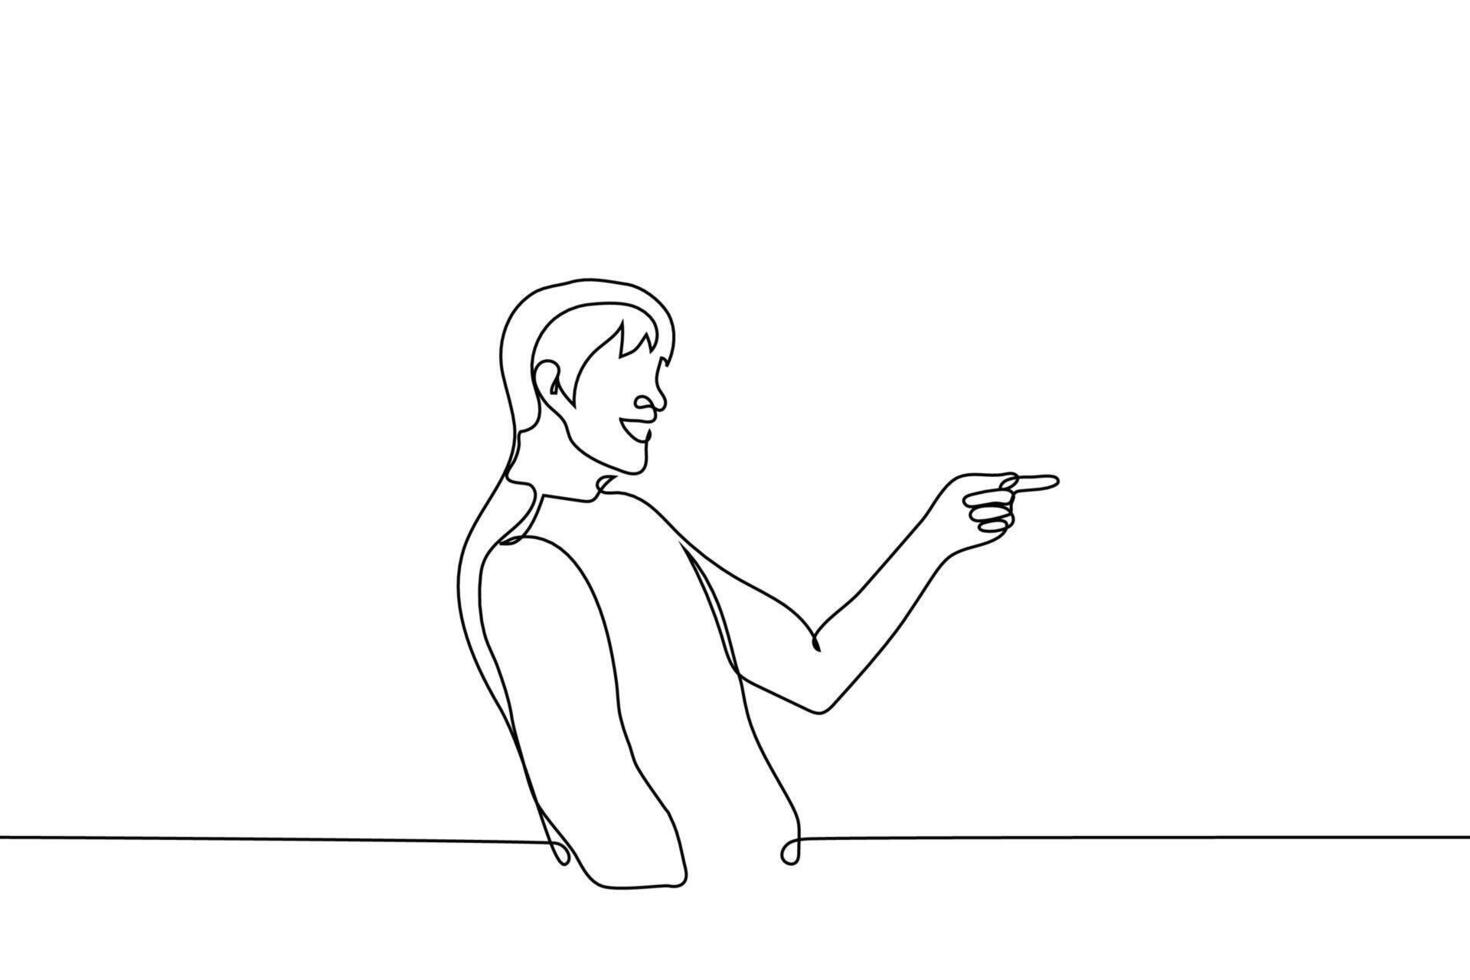 man laughs and points his finger - one line drawing vector. concept mocker, joker, merry fellow, bully vector